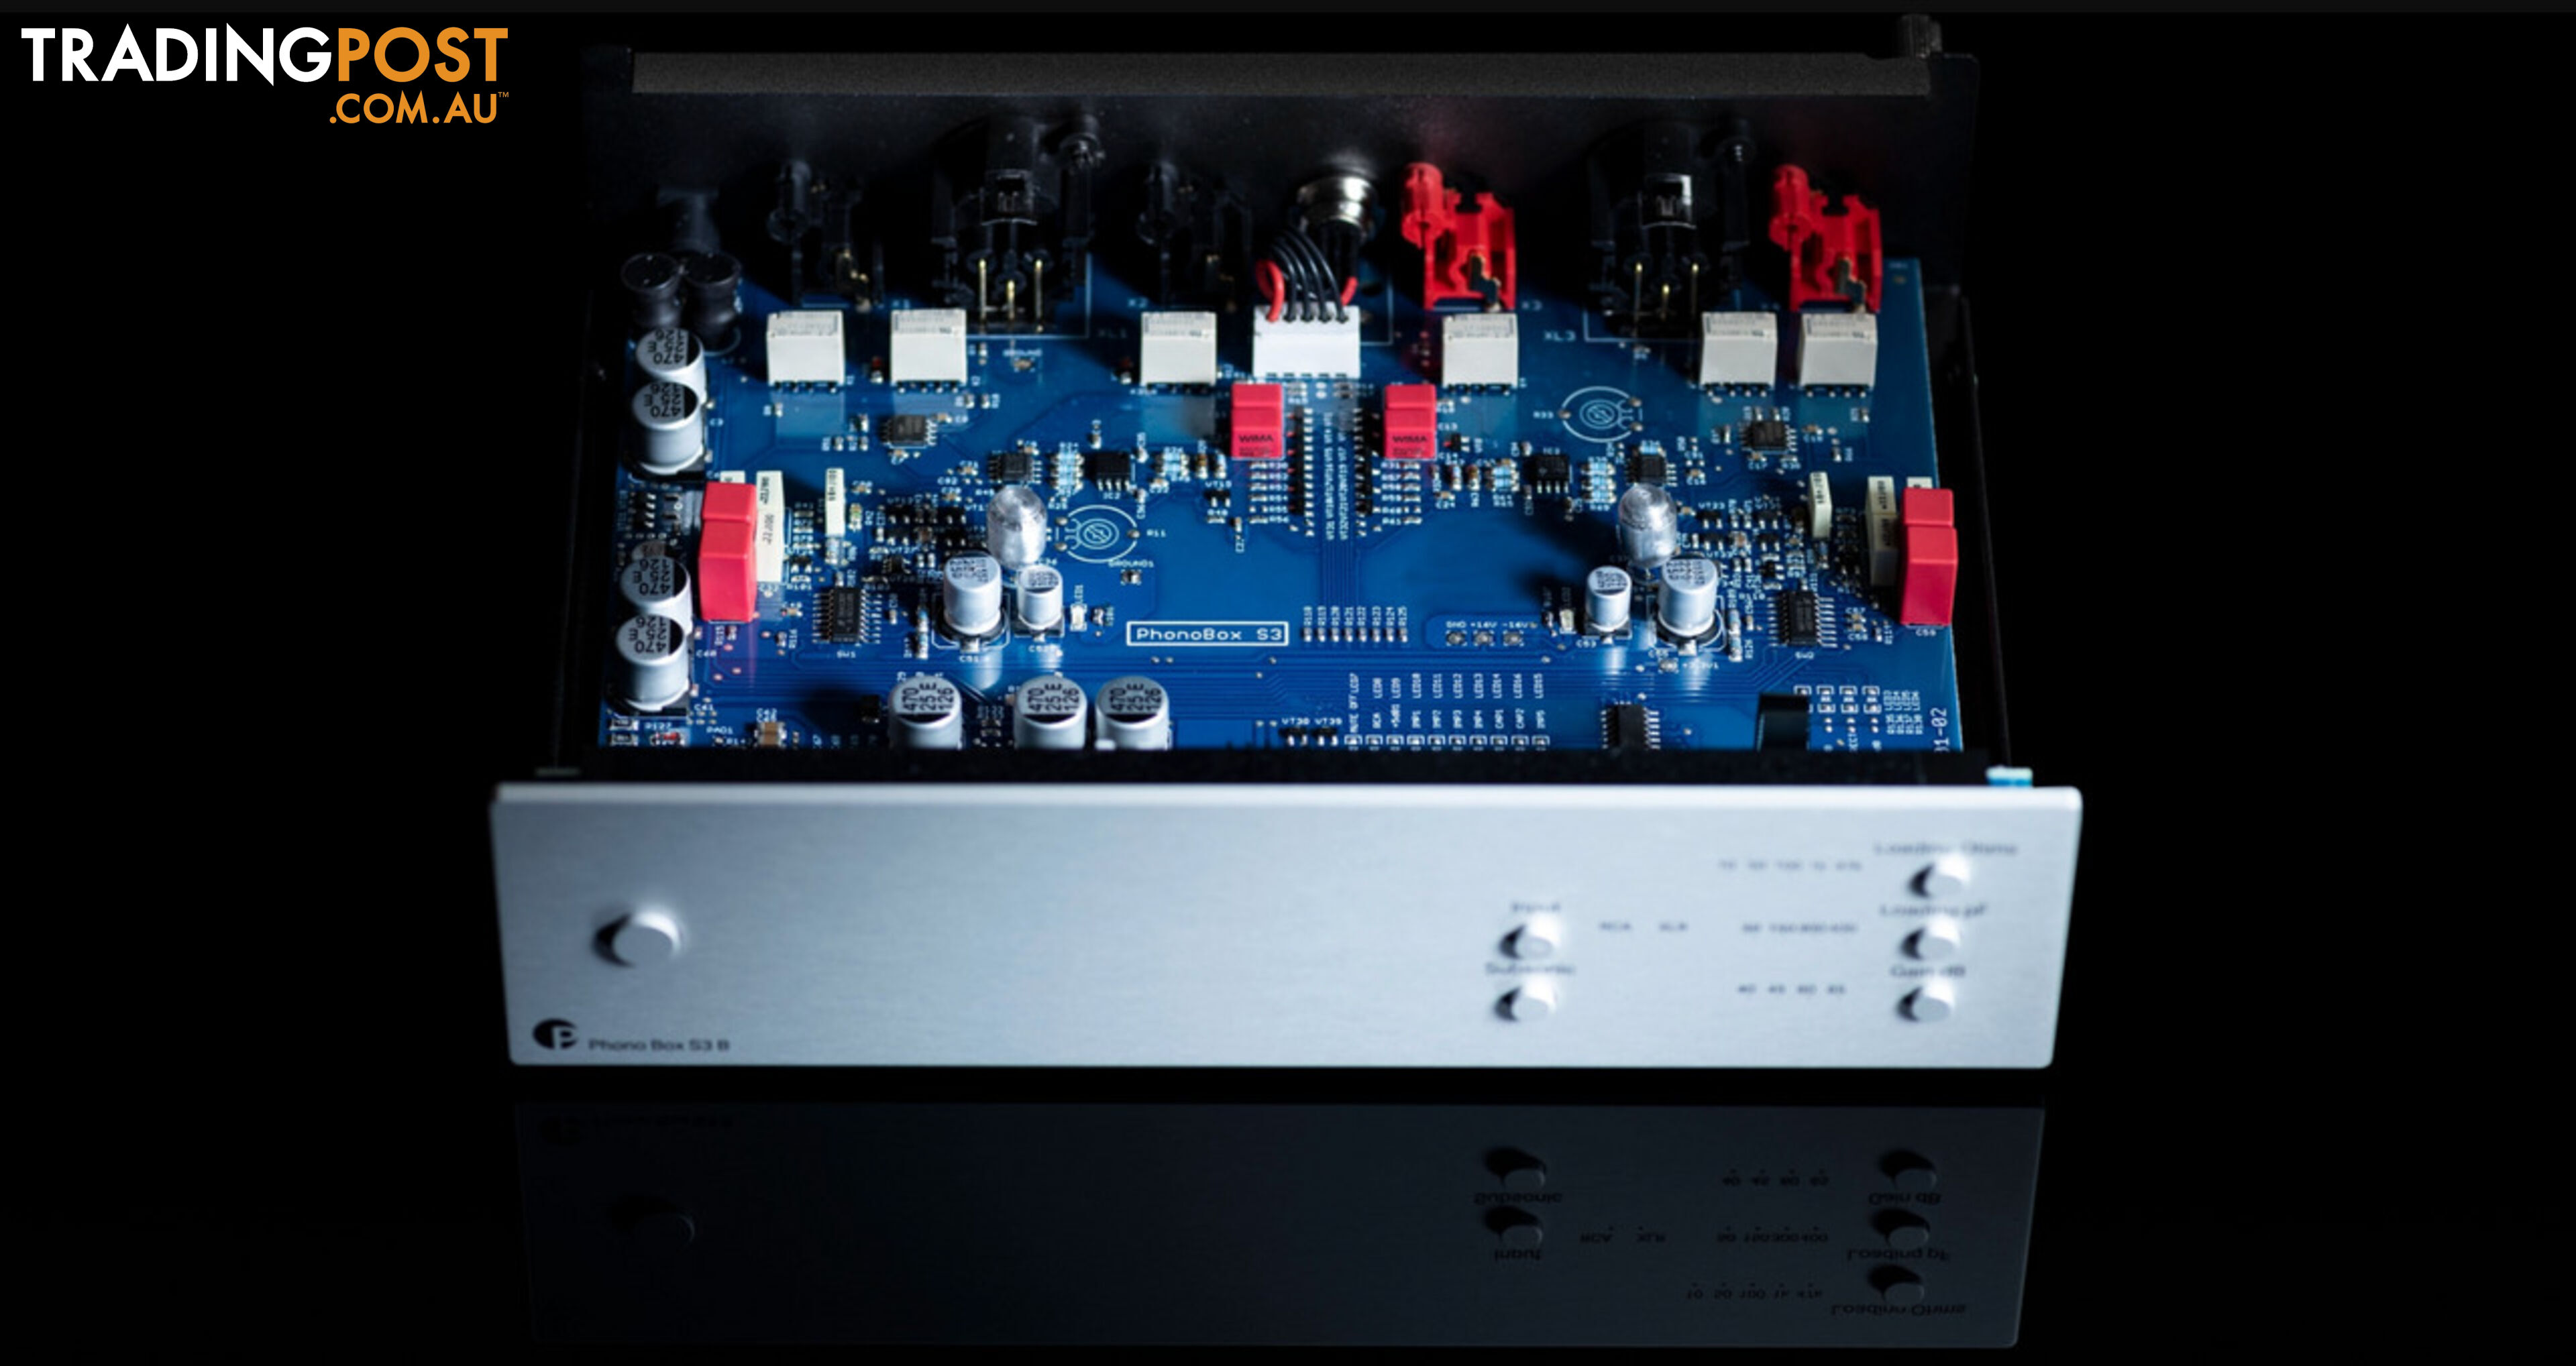 ProJect Phono Box S3 B Phono Preamplifier